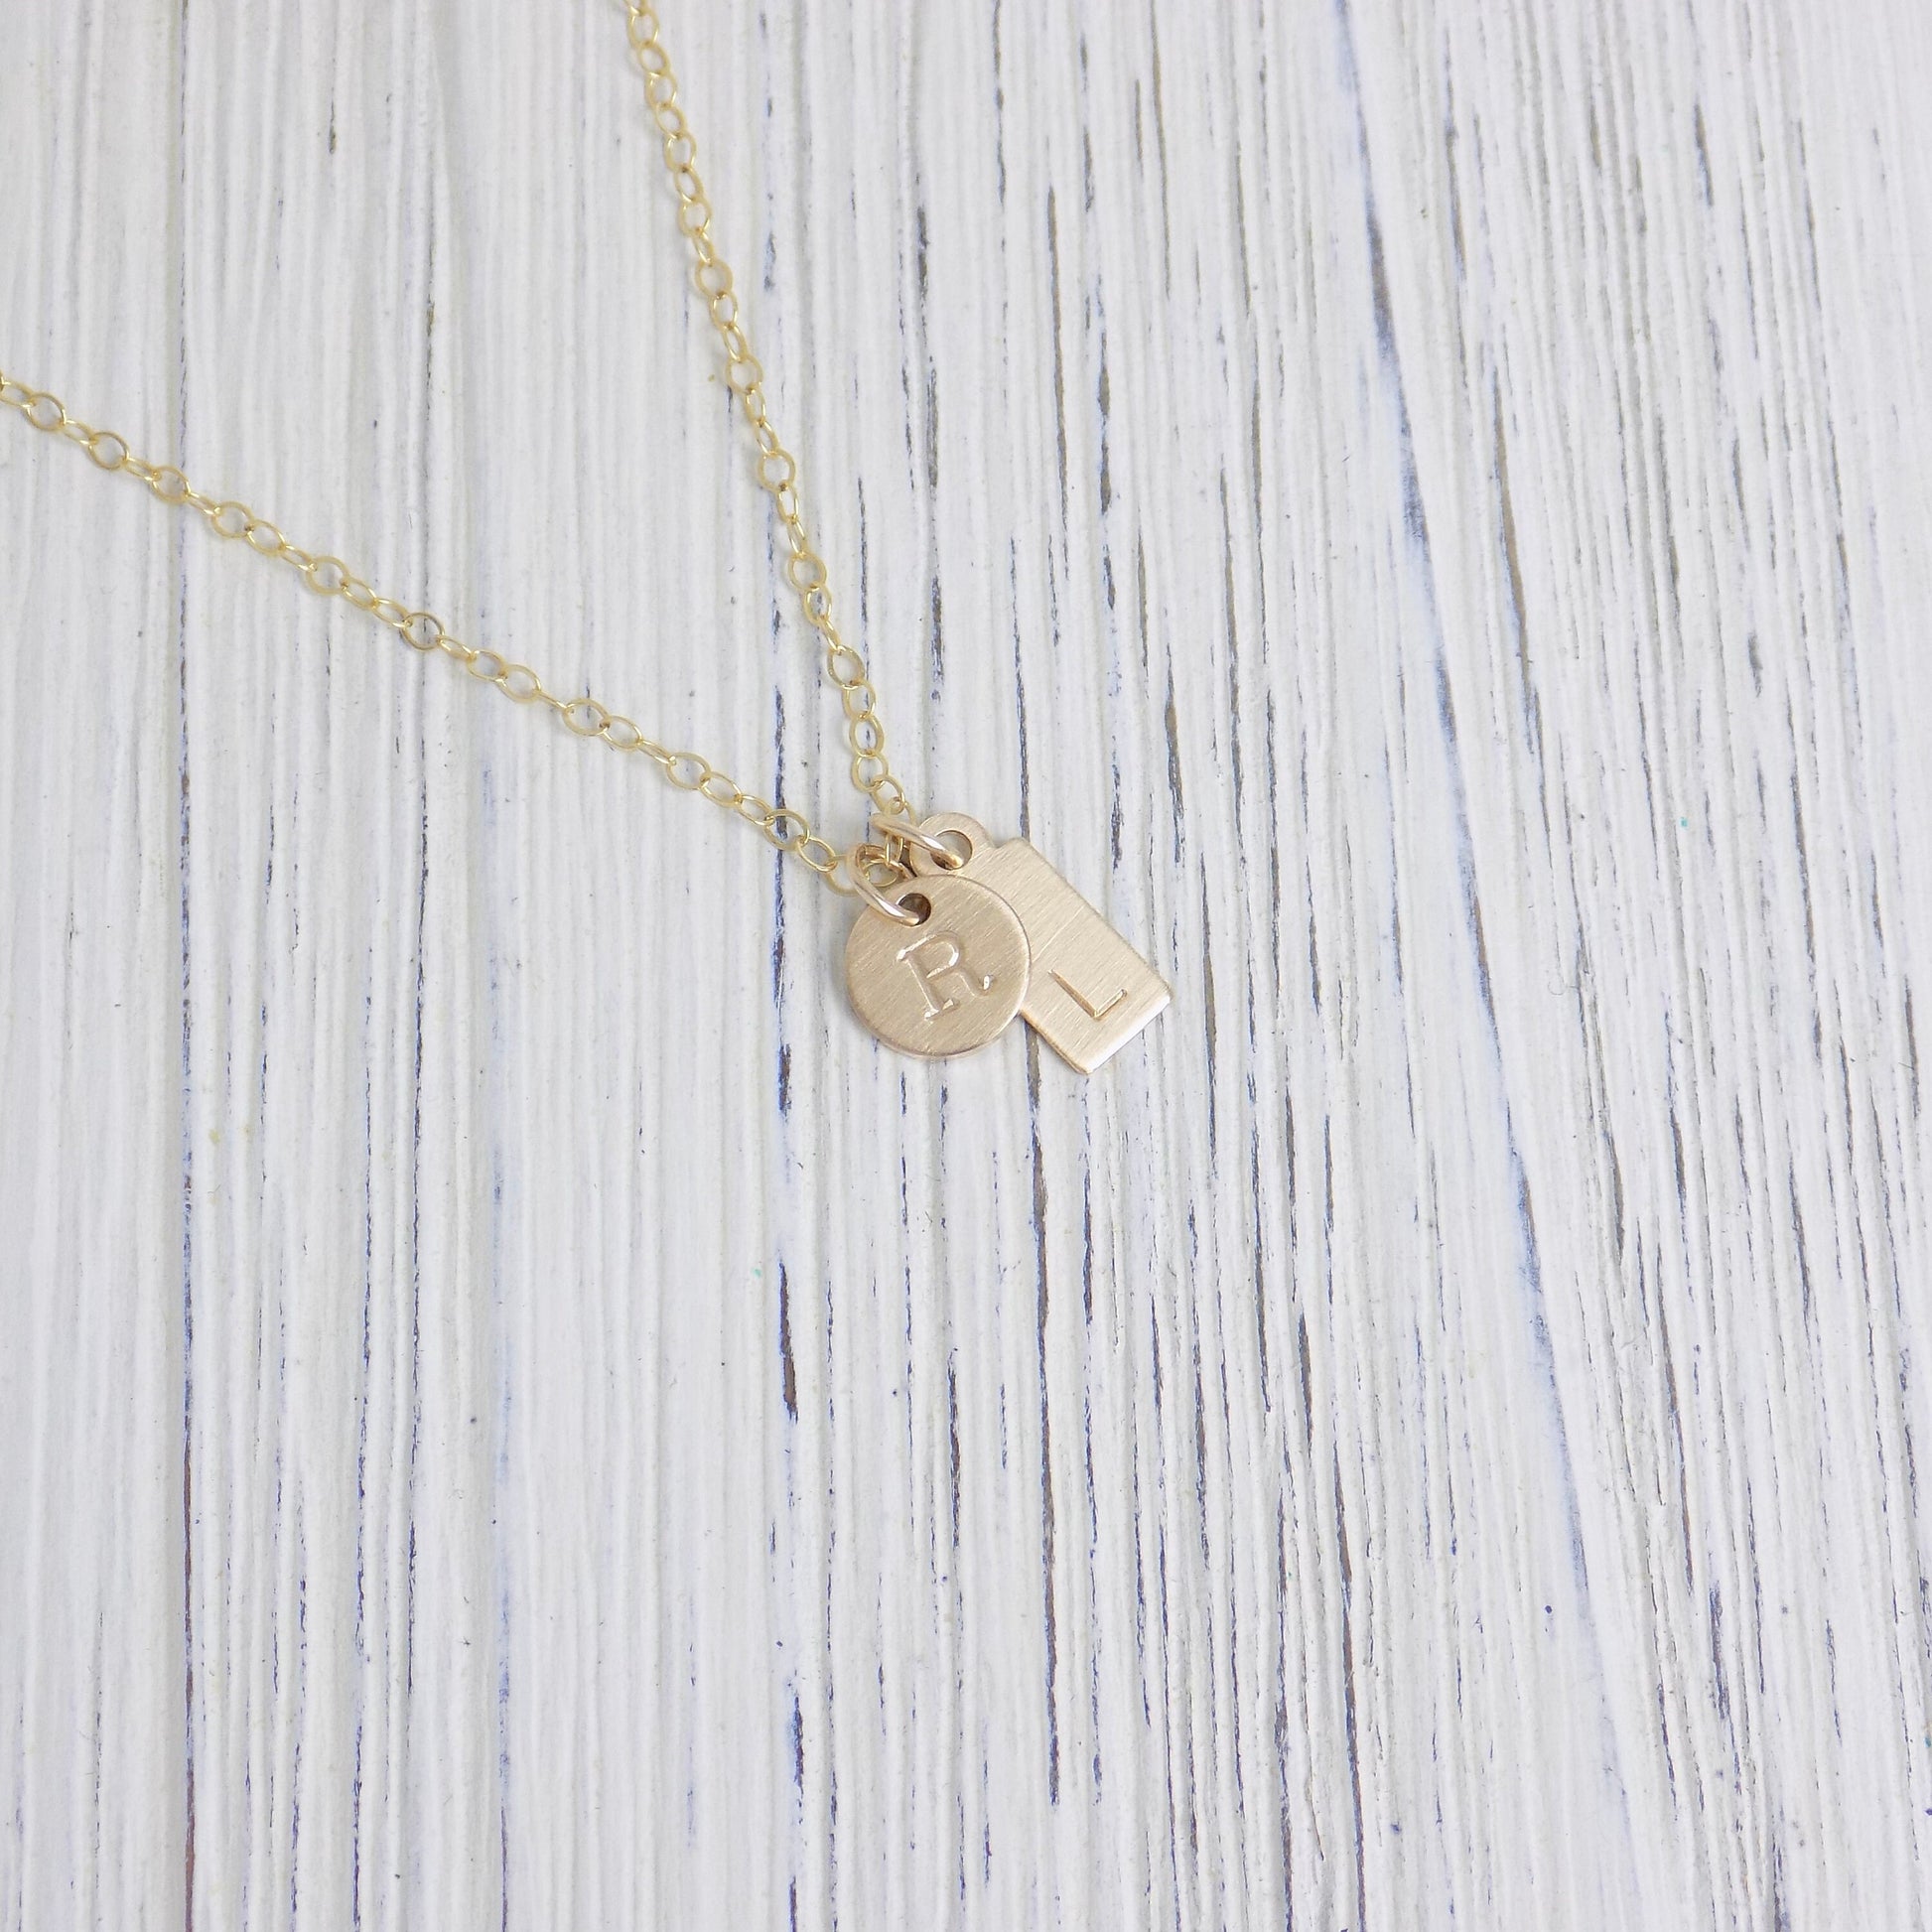 Personalized Charm Necklace - Small Tag Initial Necklace Brushed Matte Satin Finish - 14K Gold Filled Initial Necklace - Layering Gift Women